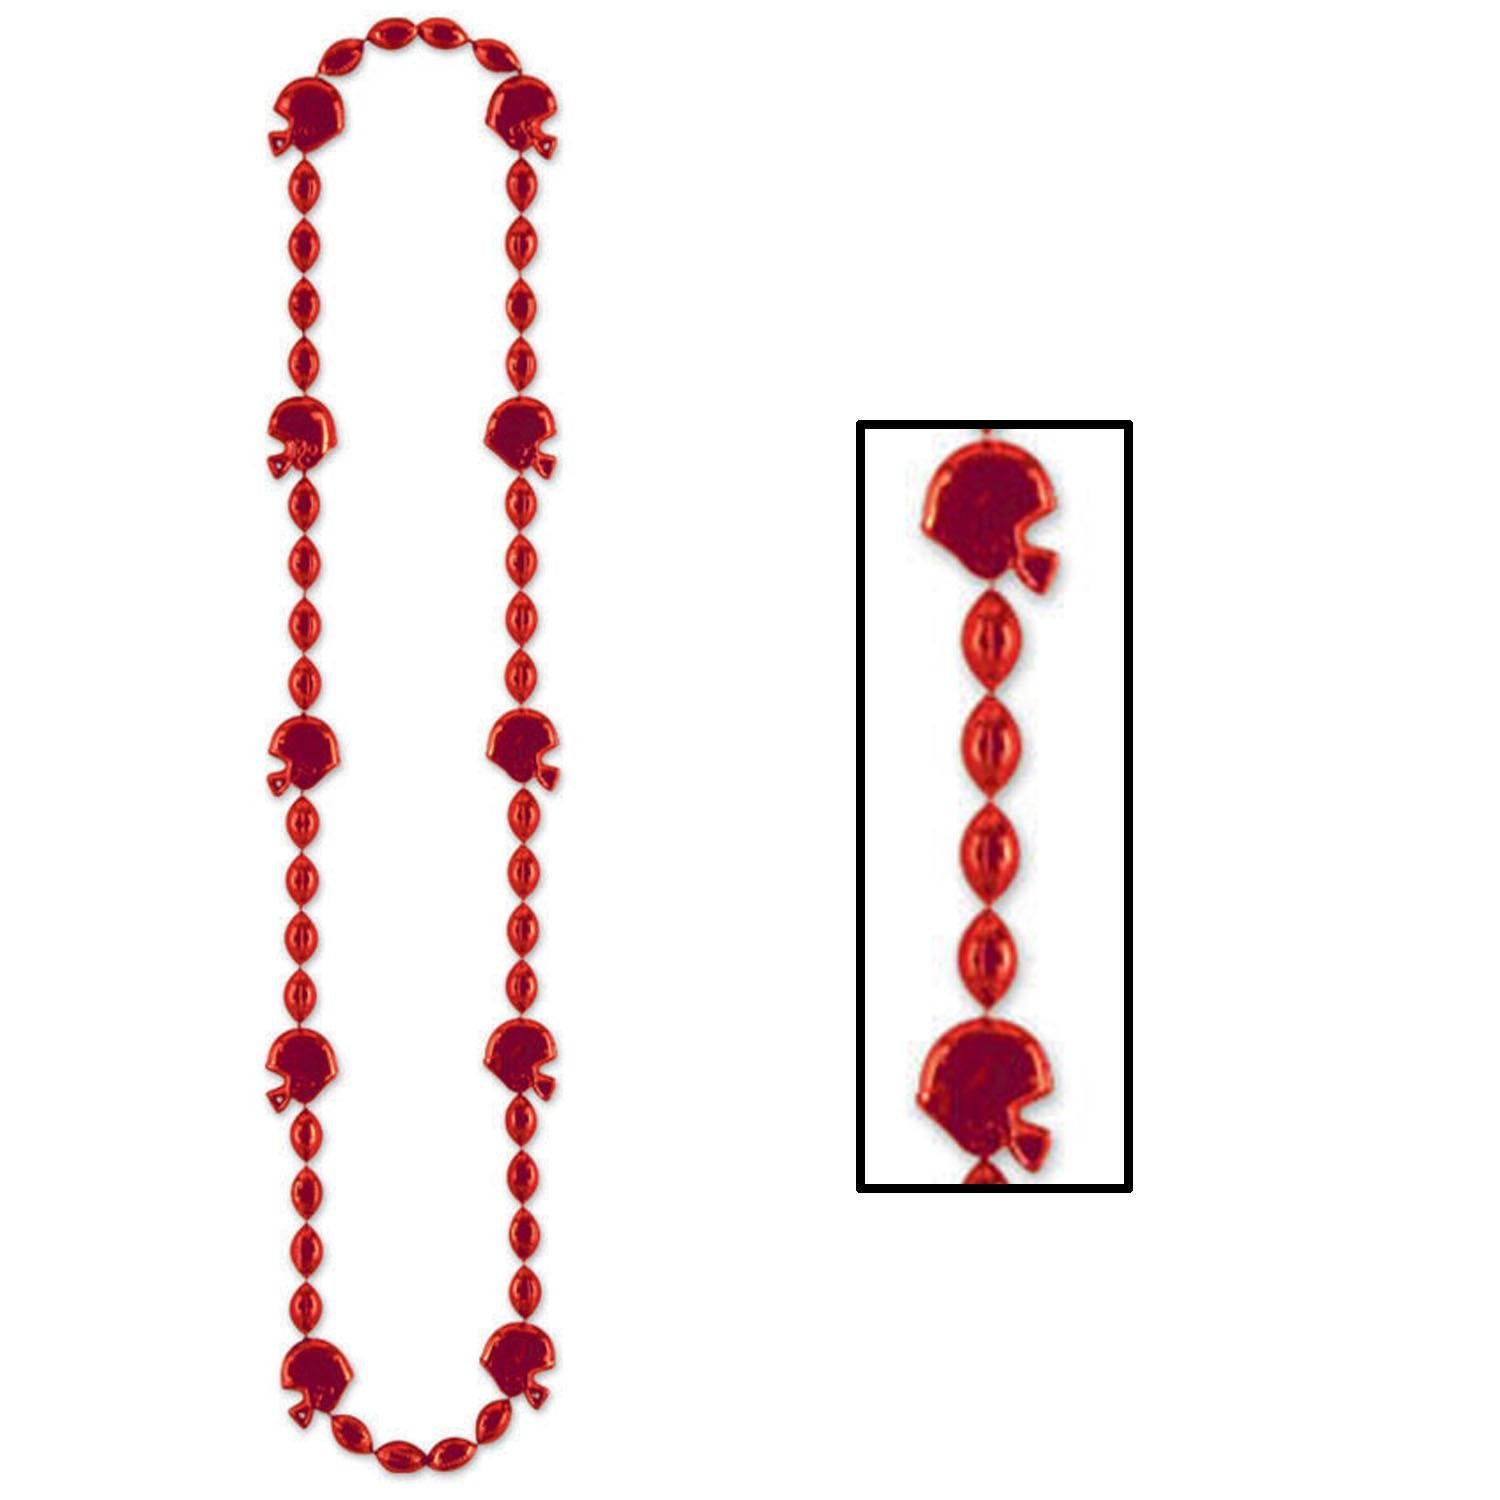 Beistle Football Party Bead Necklaces - Red